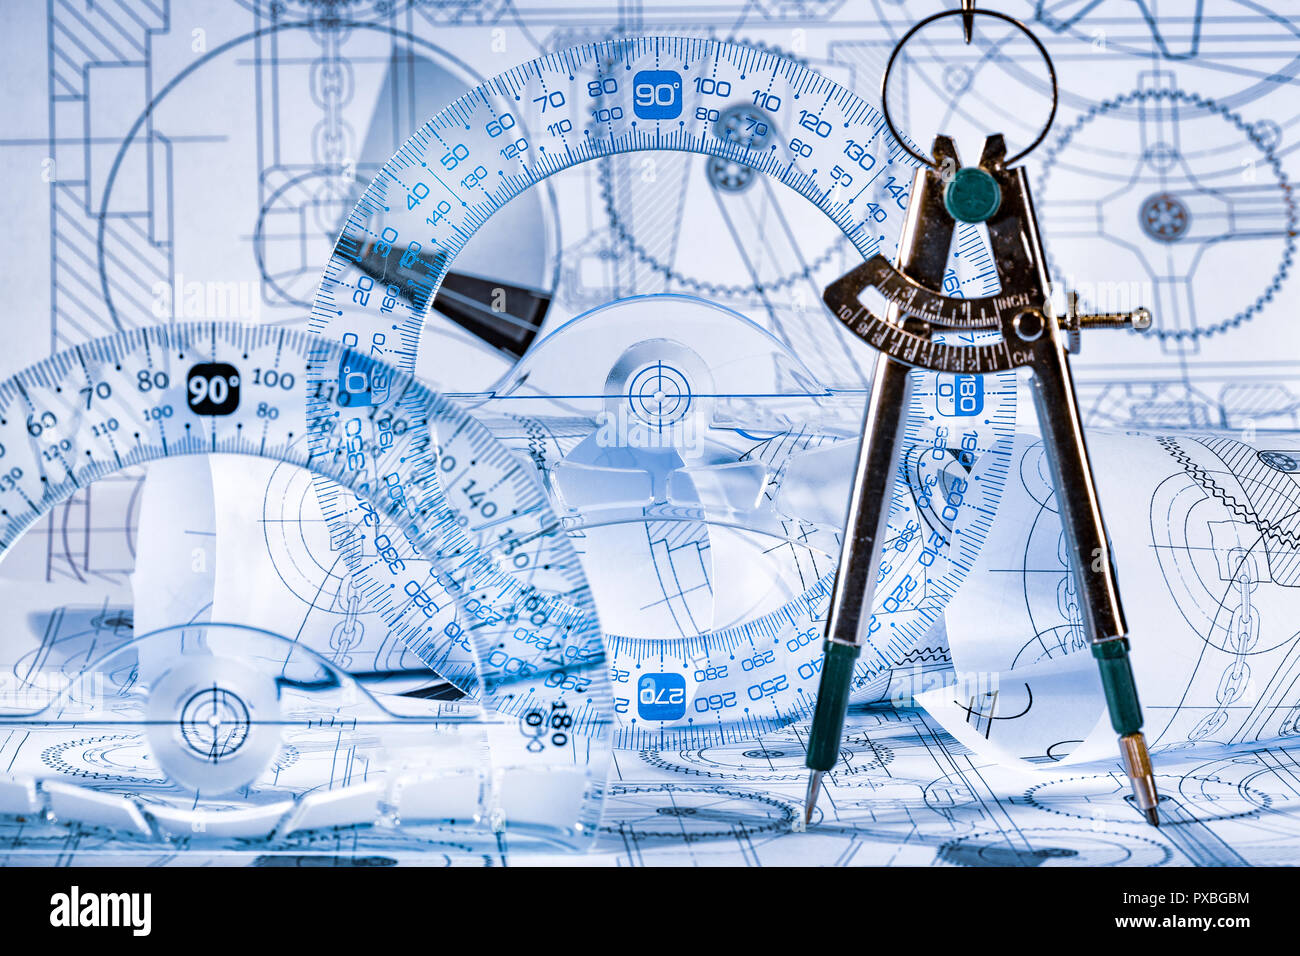 Technical drawing and tools Stock Photo